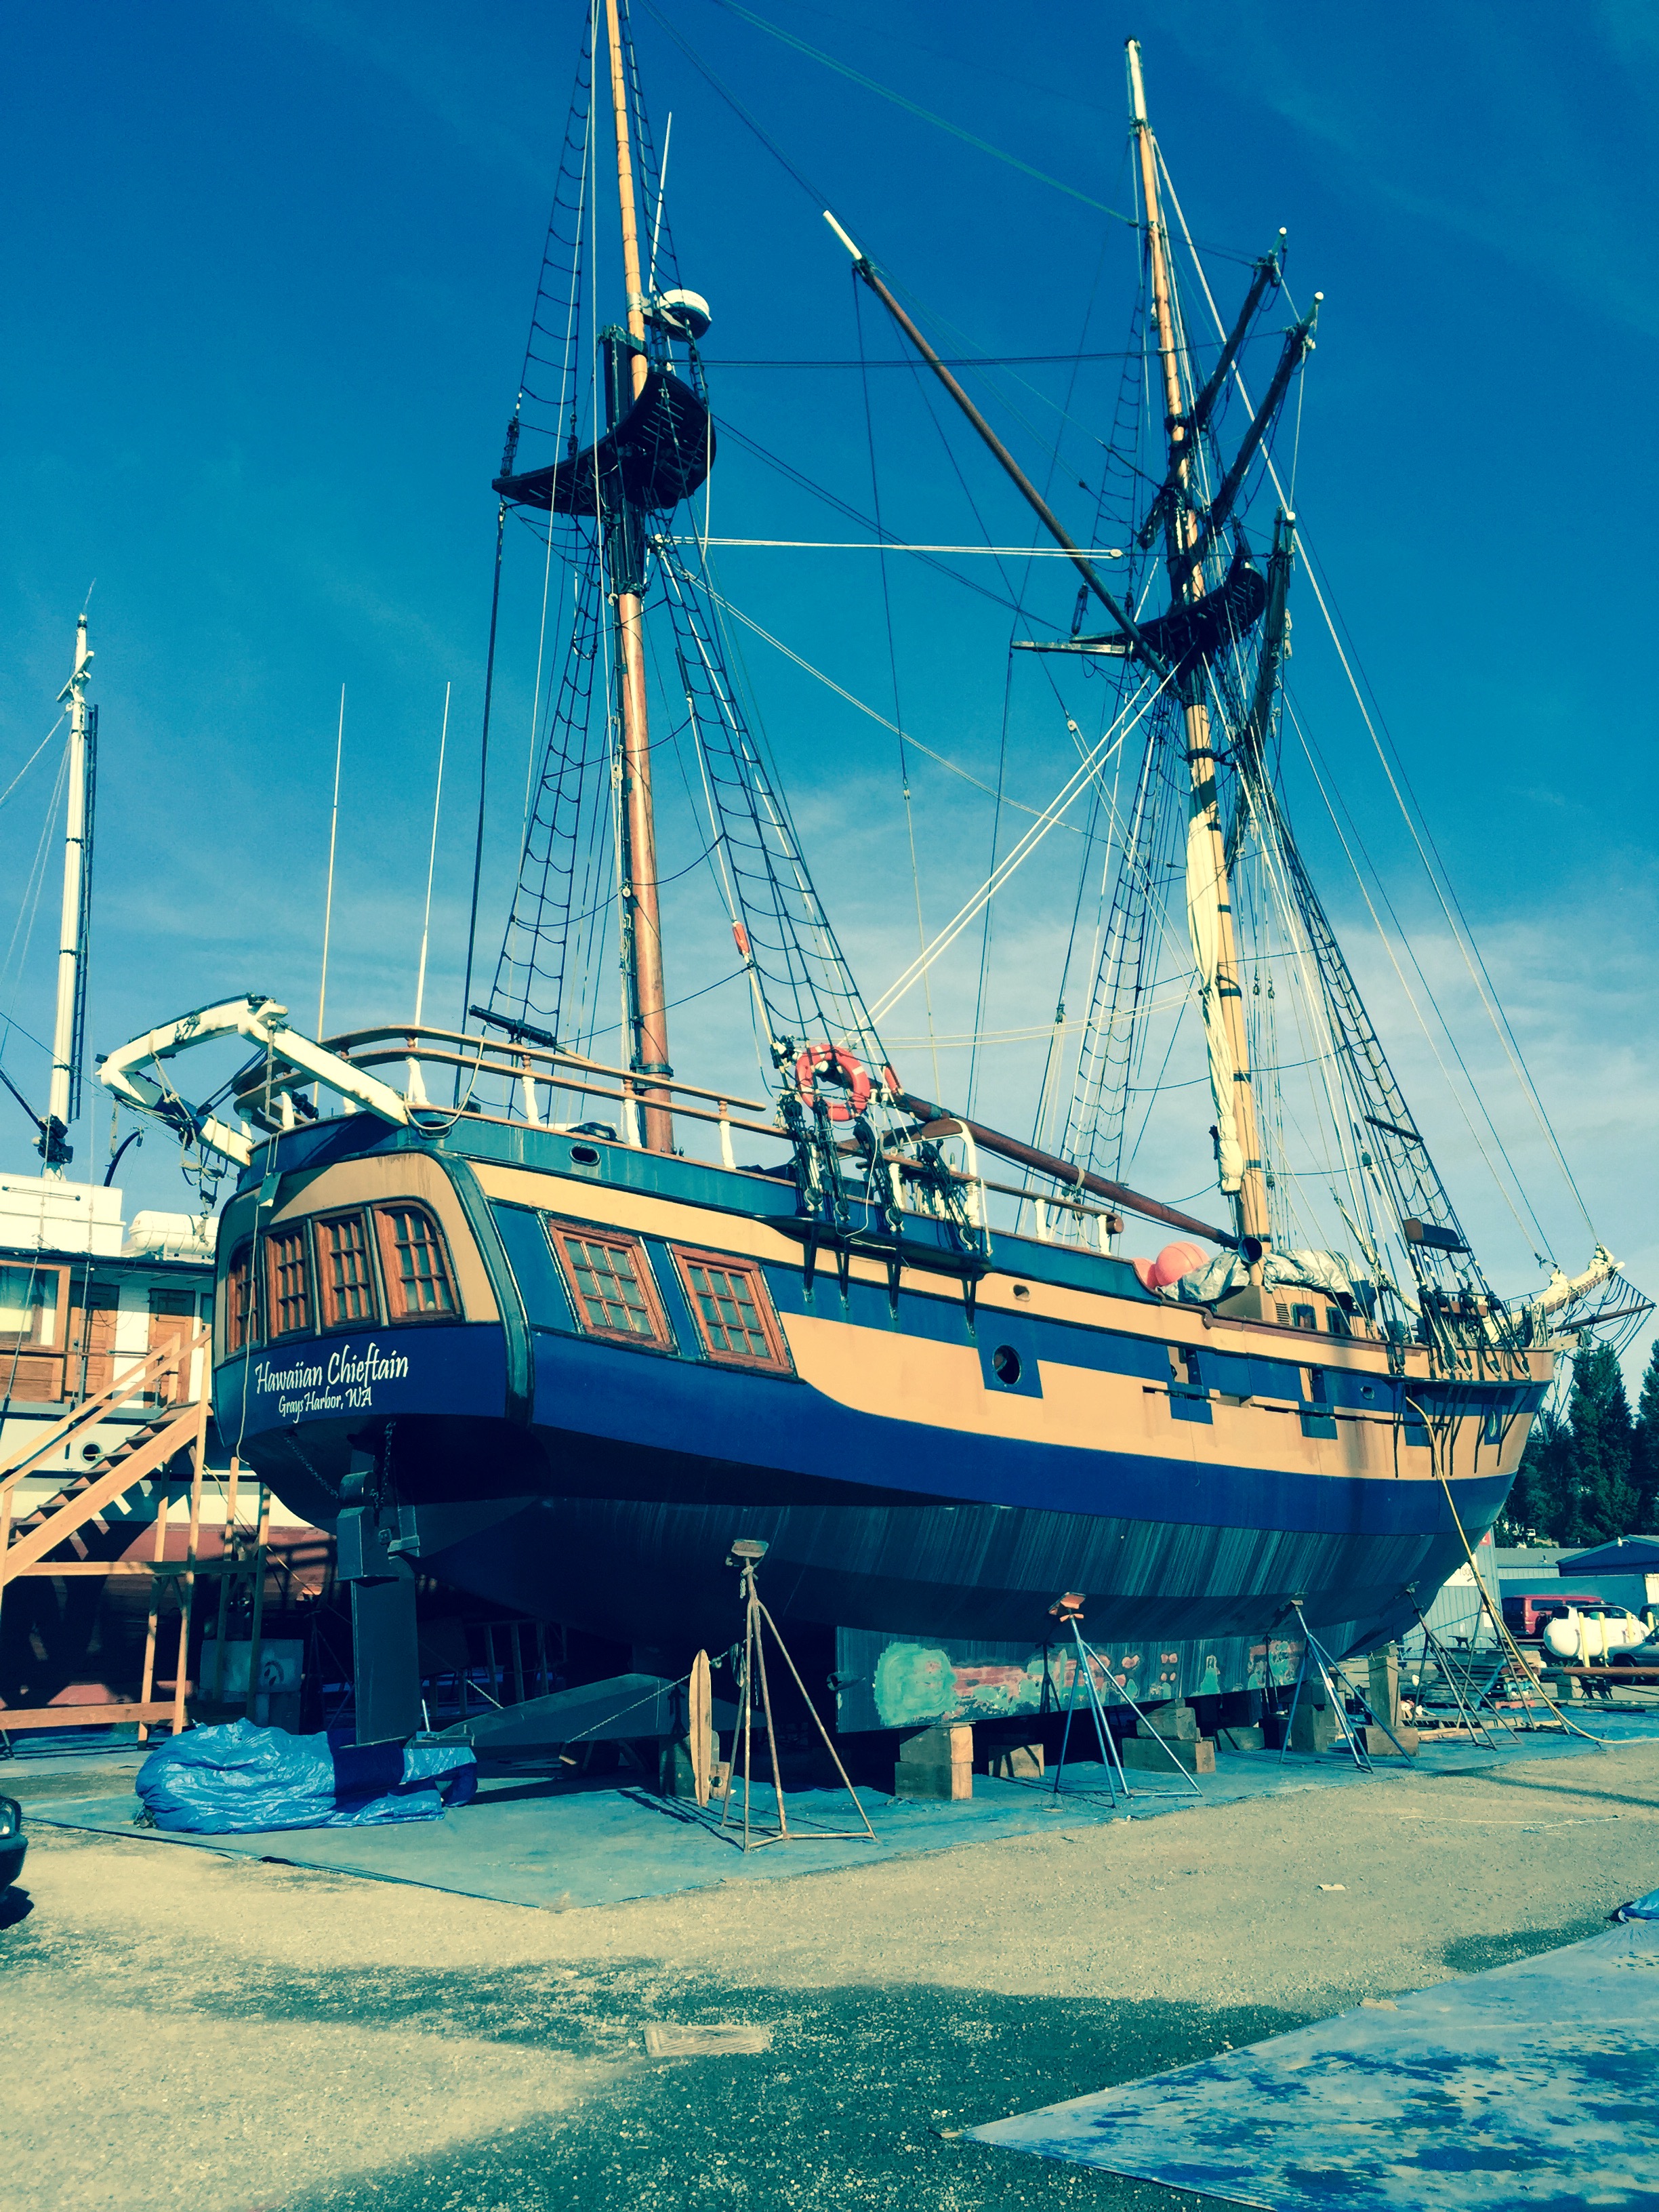 Pirate ship at Port Townsend